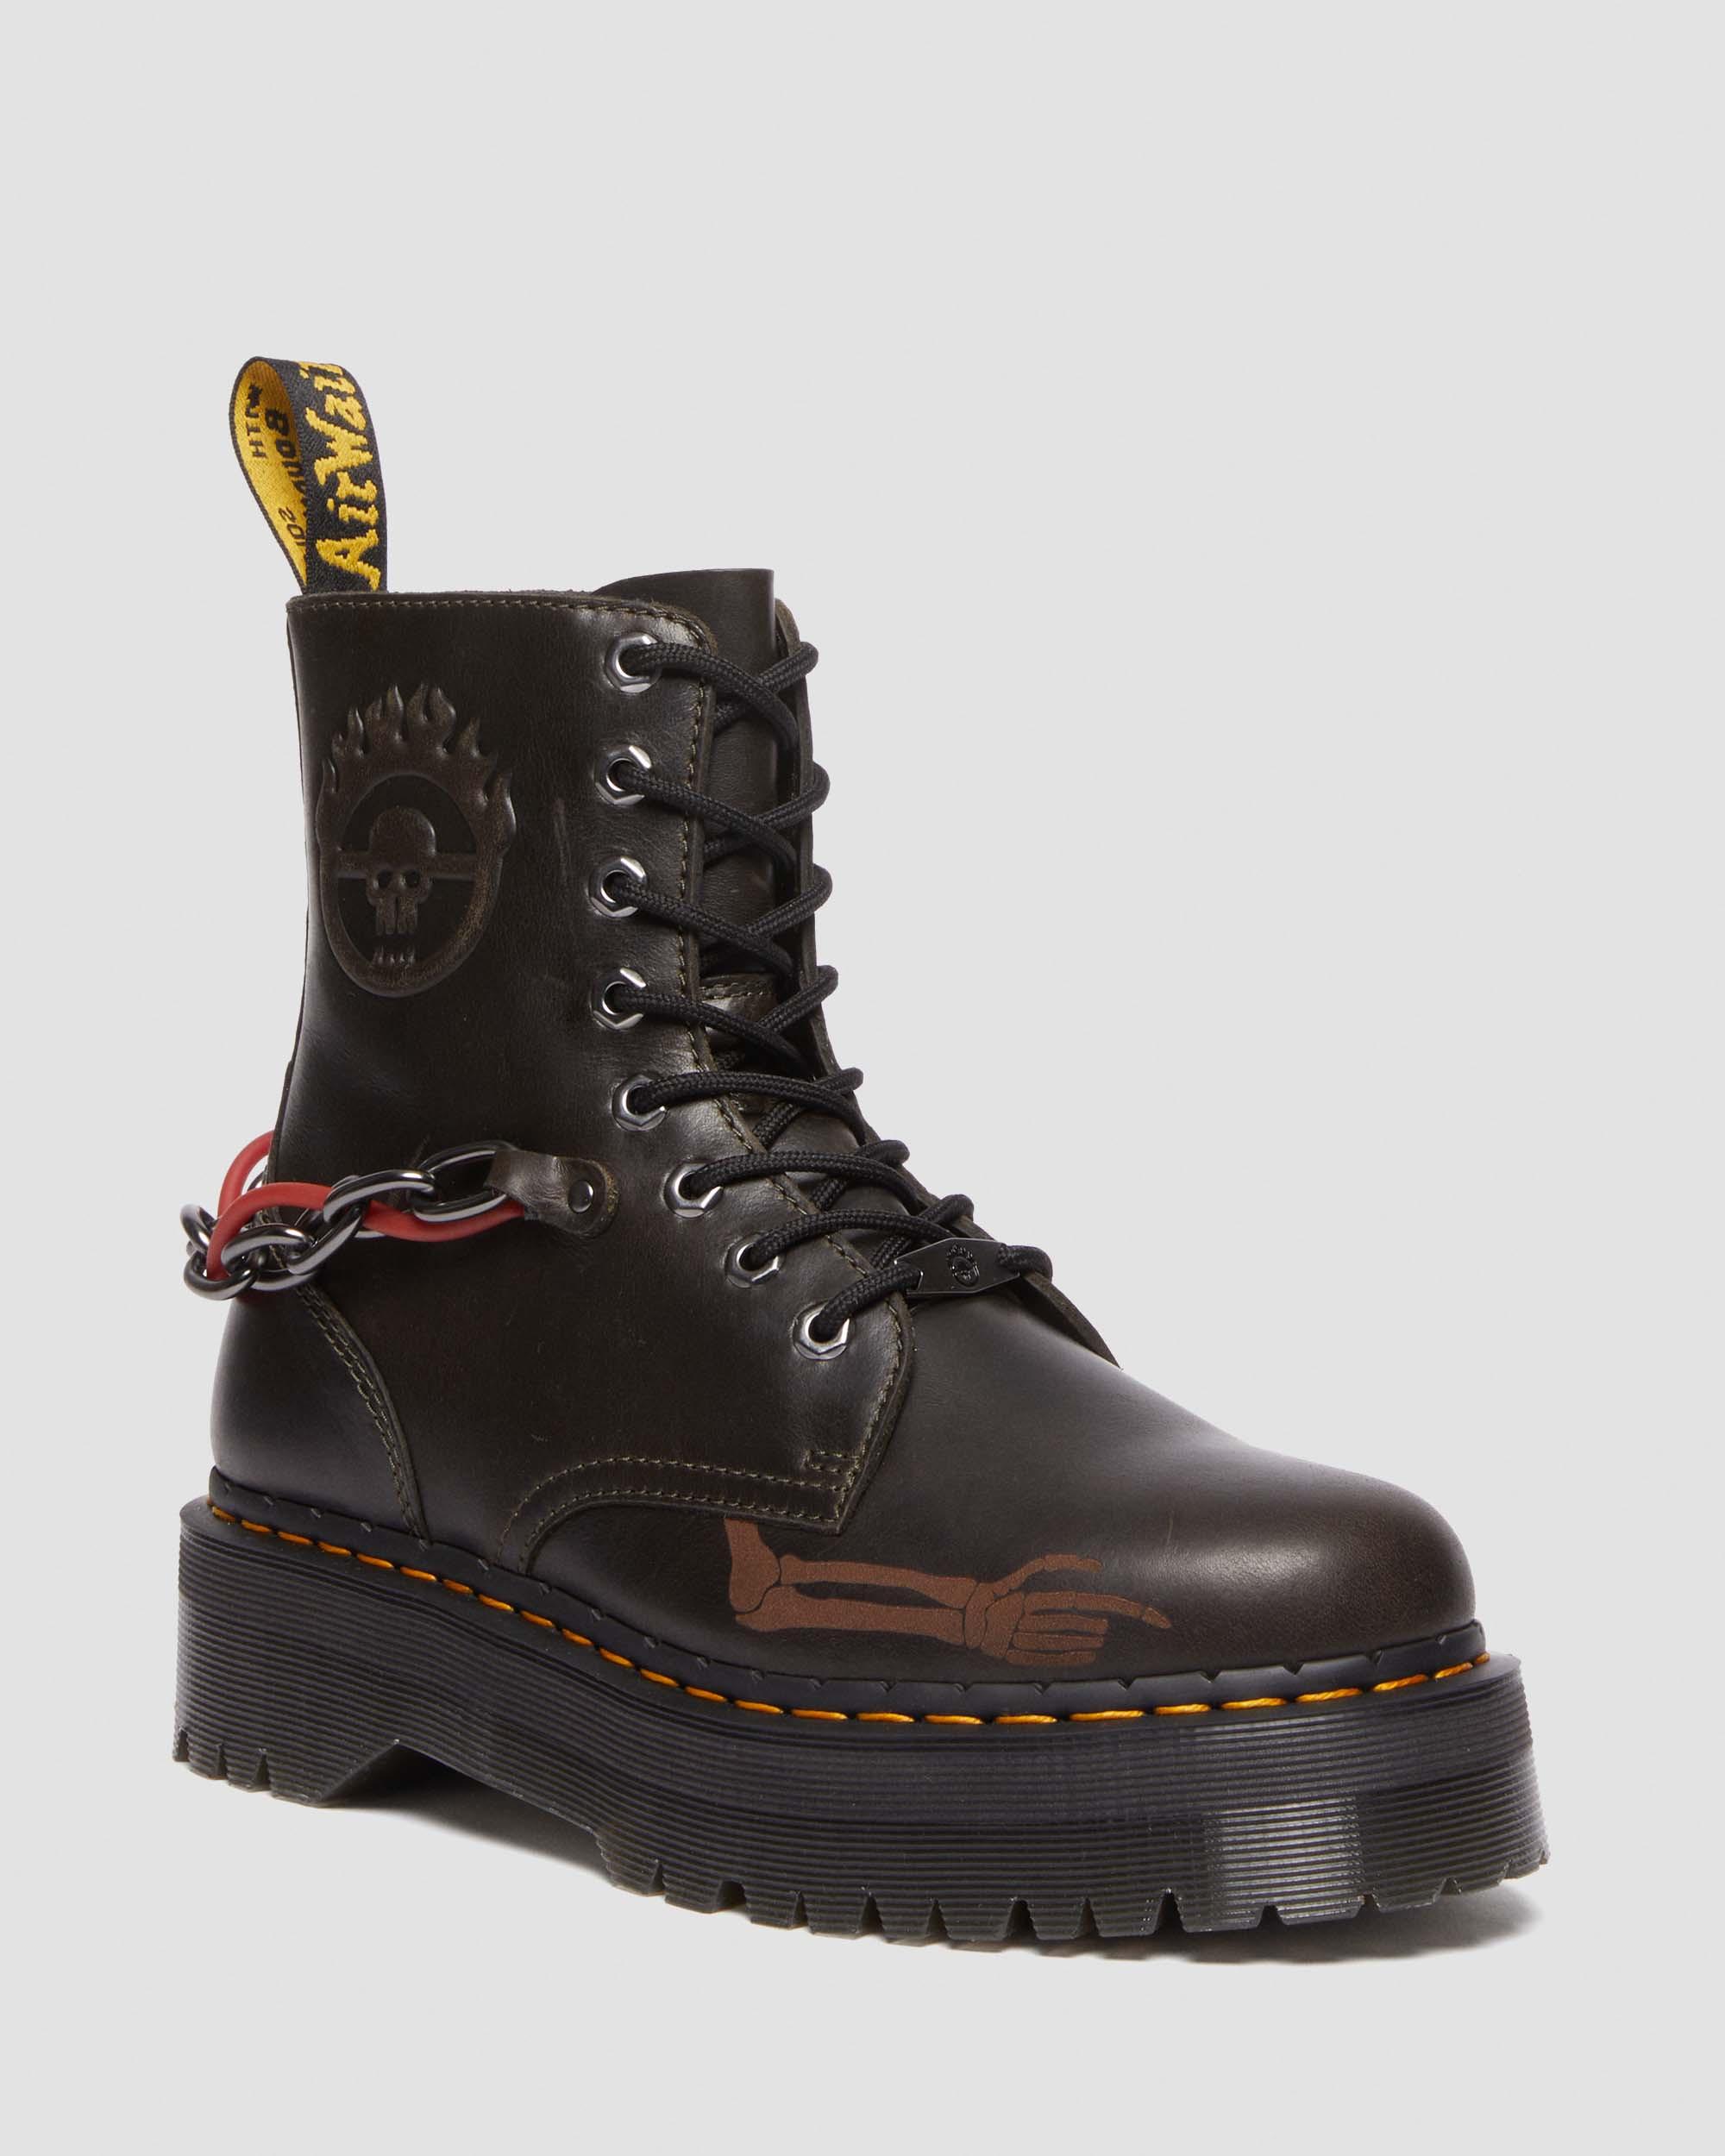 Jadon Boot WB Mad Max Leather Platforms in Dark Taupe | Dr. Martens